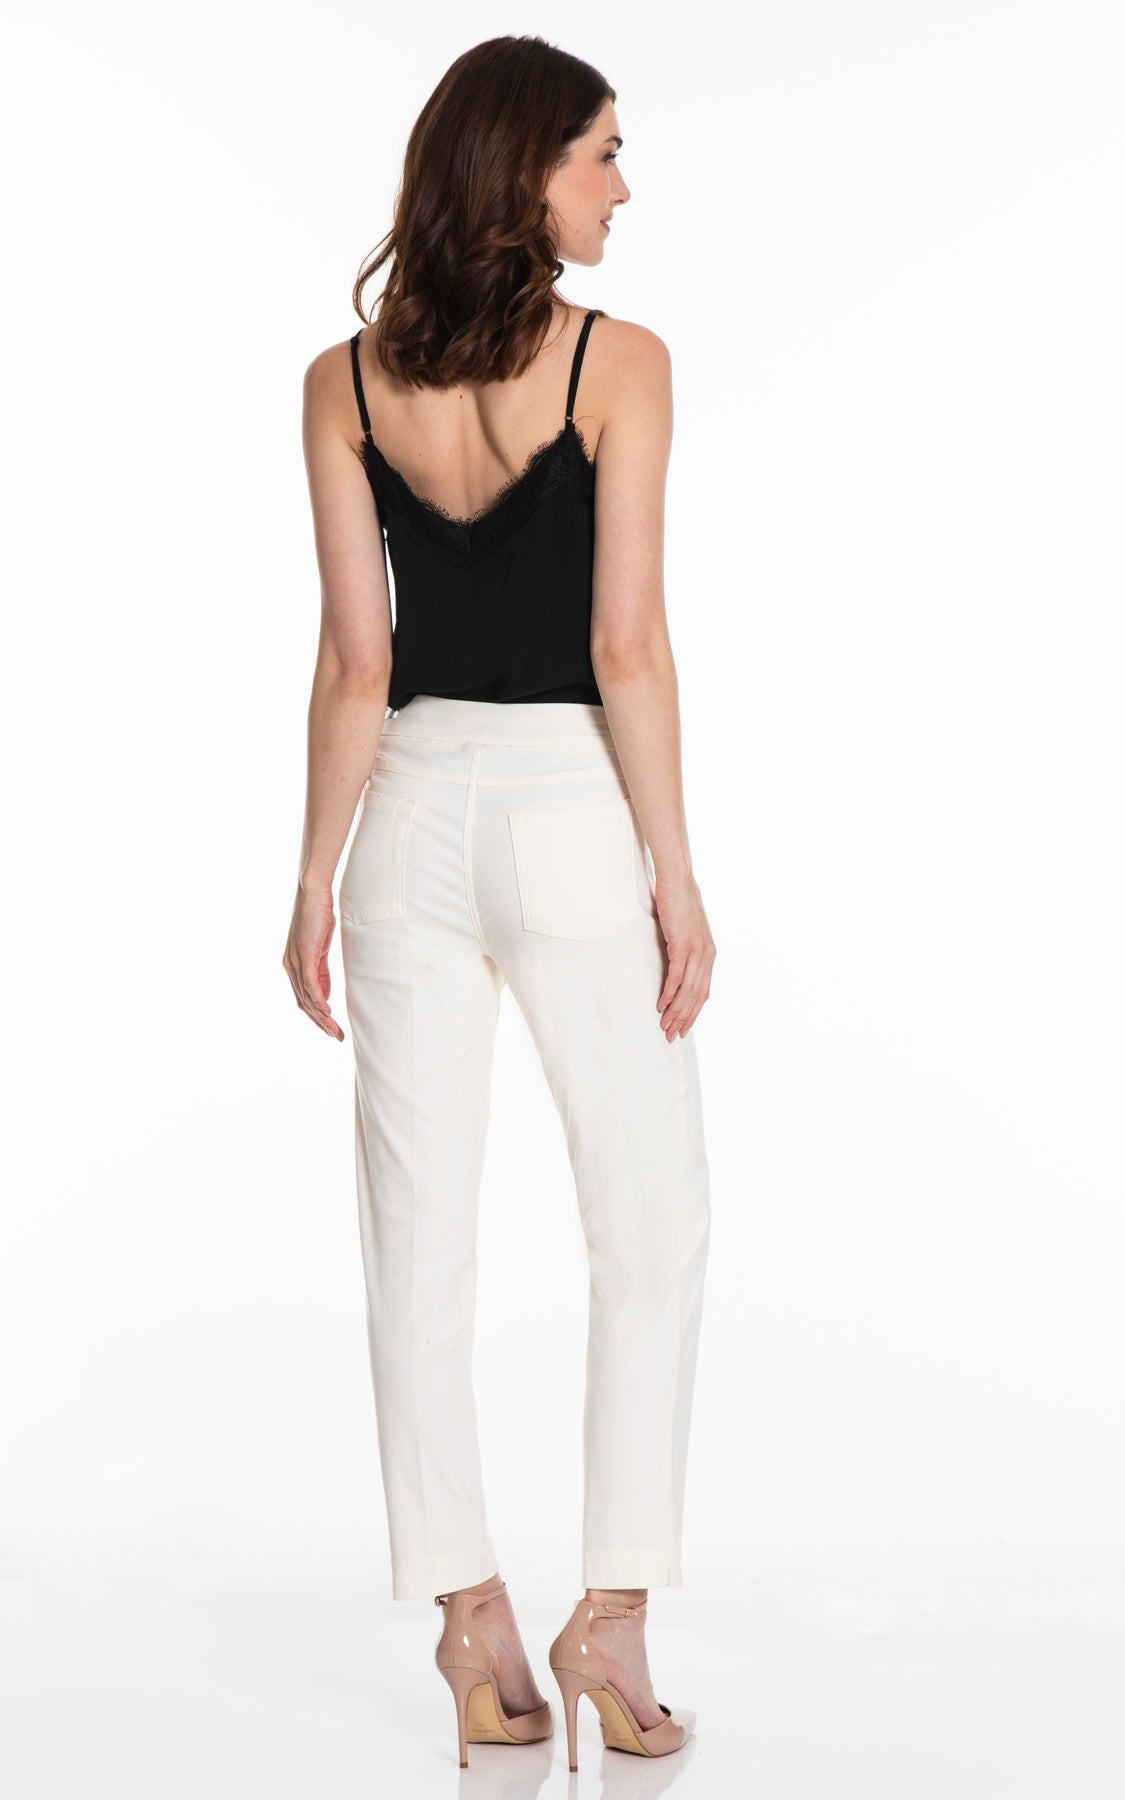 PULL-ON ANKLE PANT WITH REAL FRONT & BACK POCKETS - ECRU